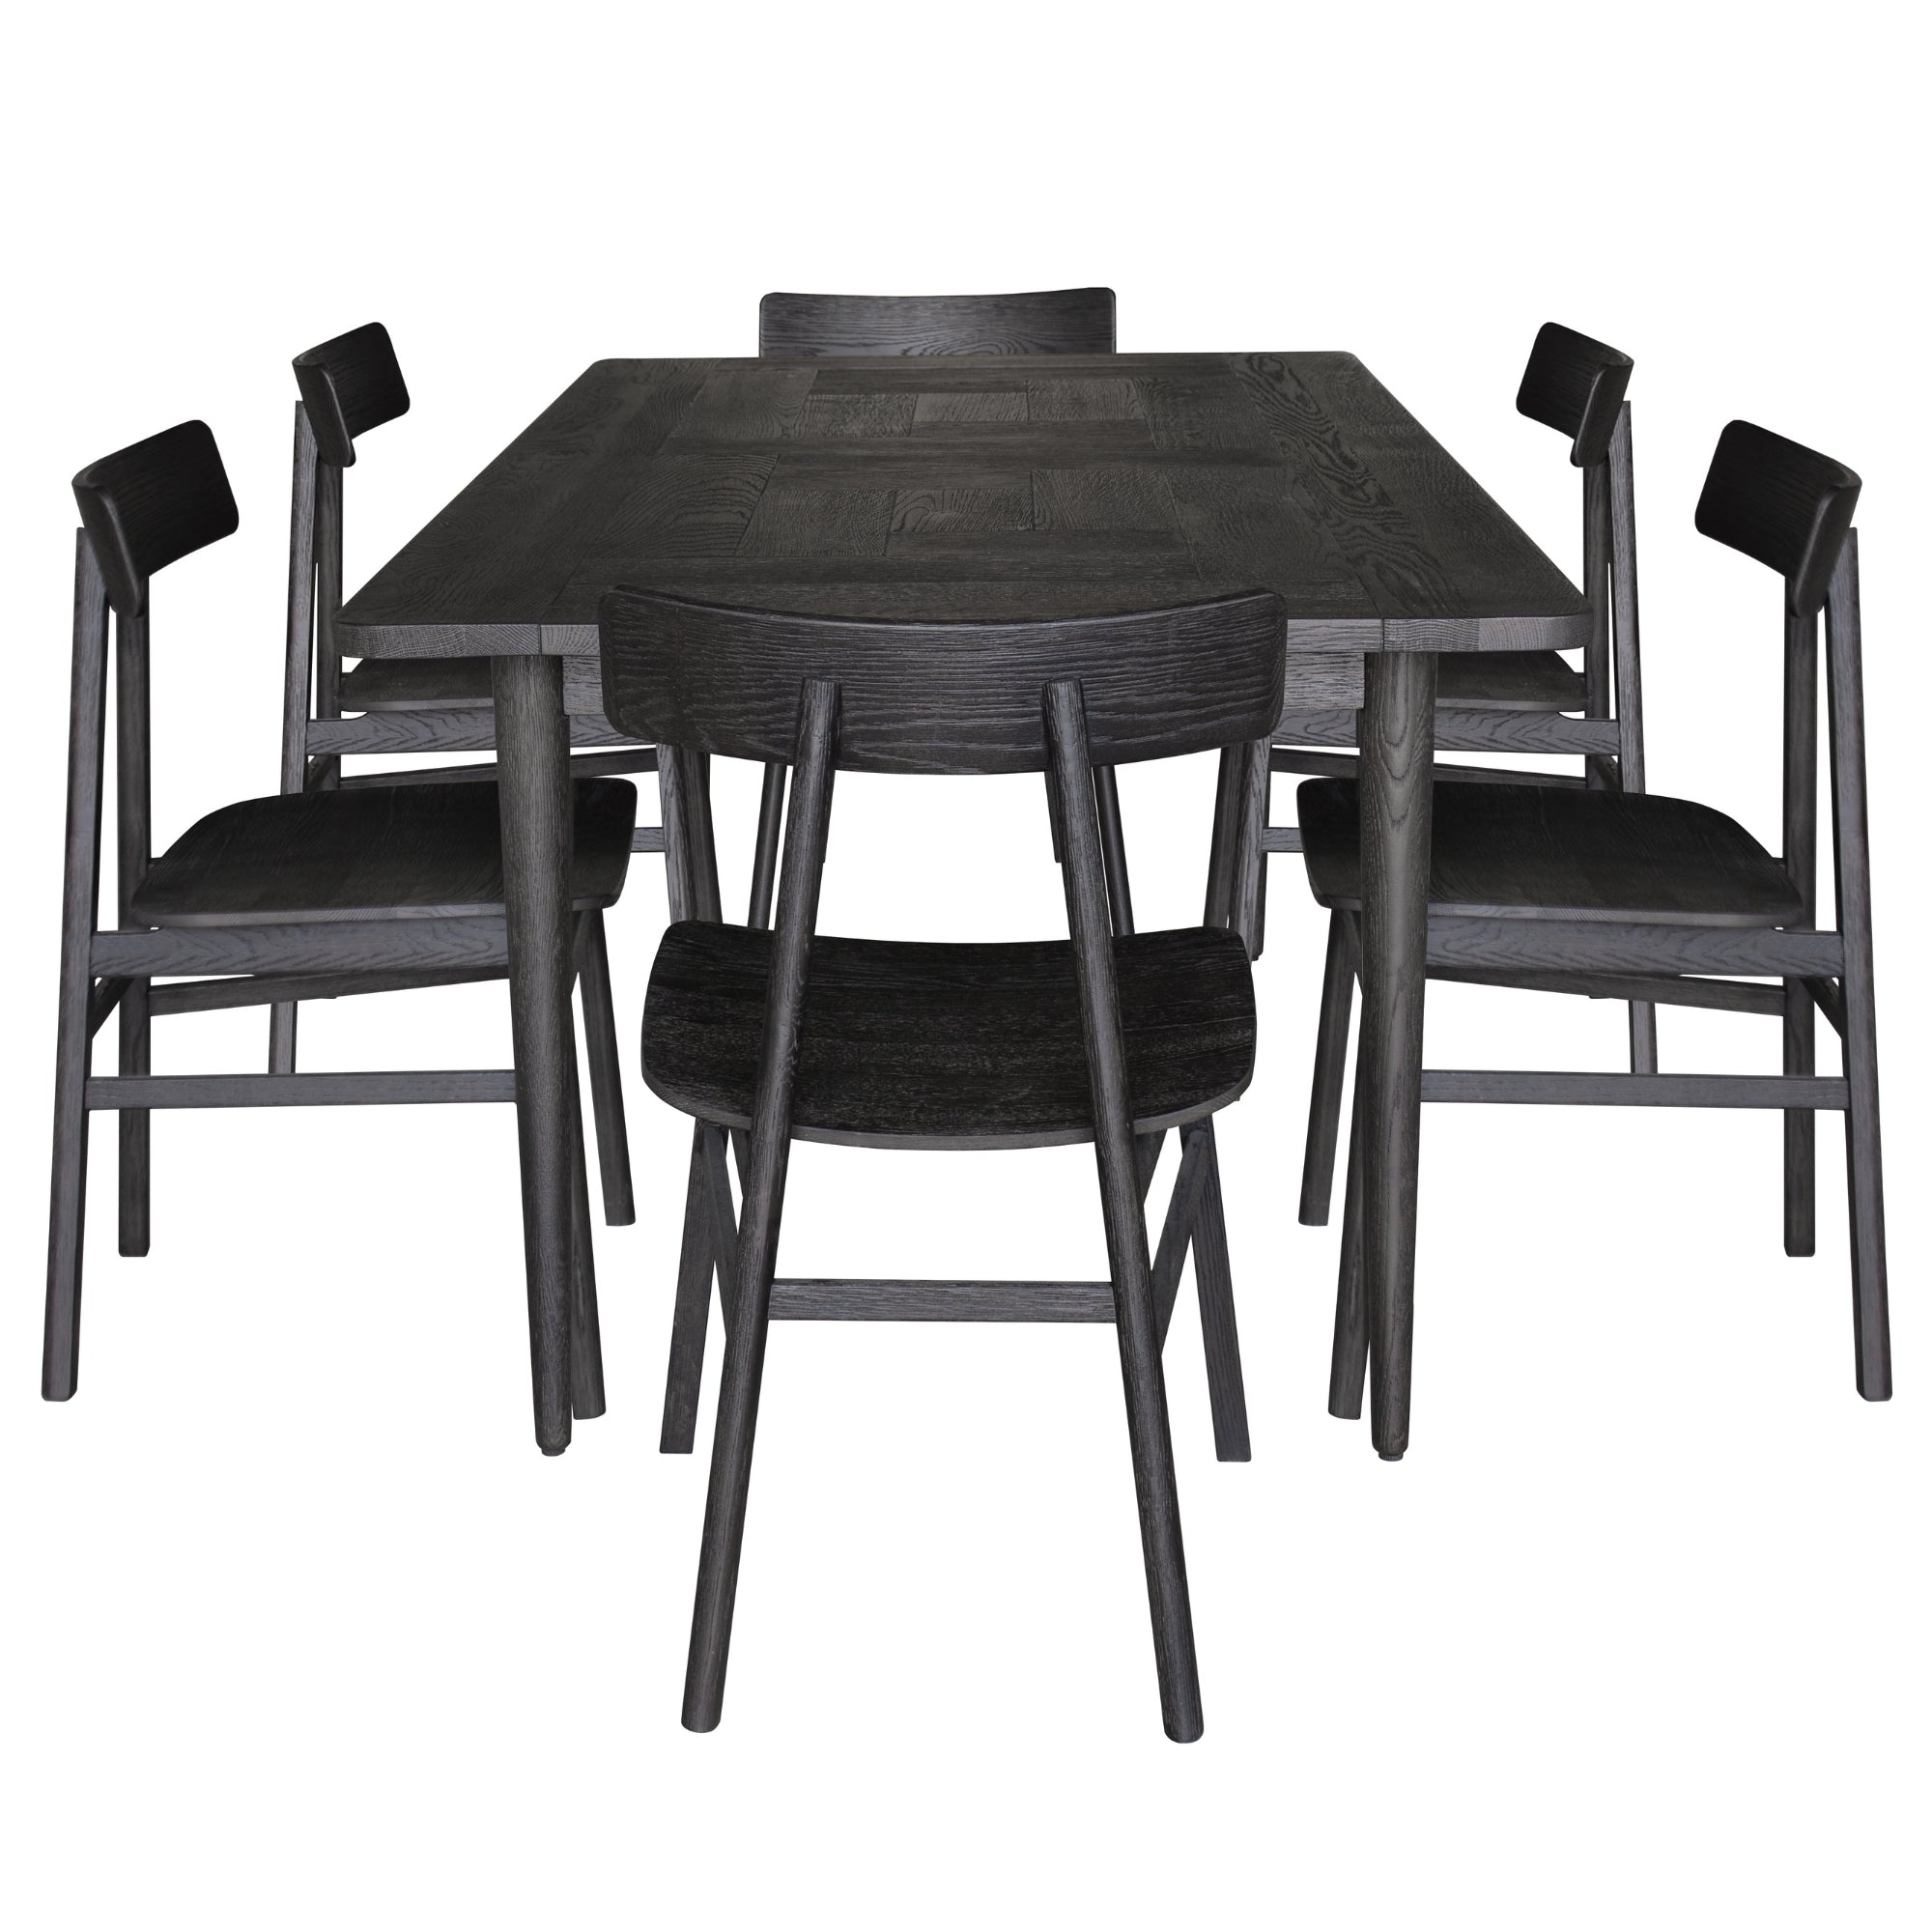 Claire 7pc Dining Set Table 180cm Solid Oak Wood Timber Seat Chair - Black - SILBERSHELL